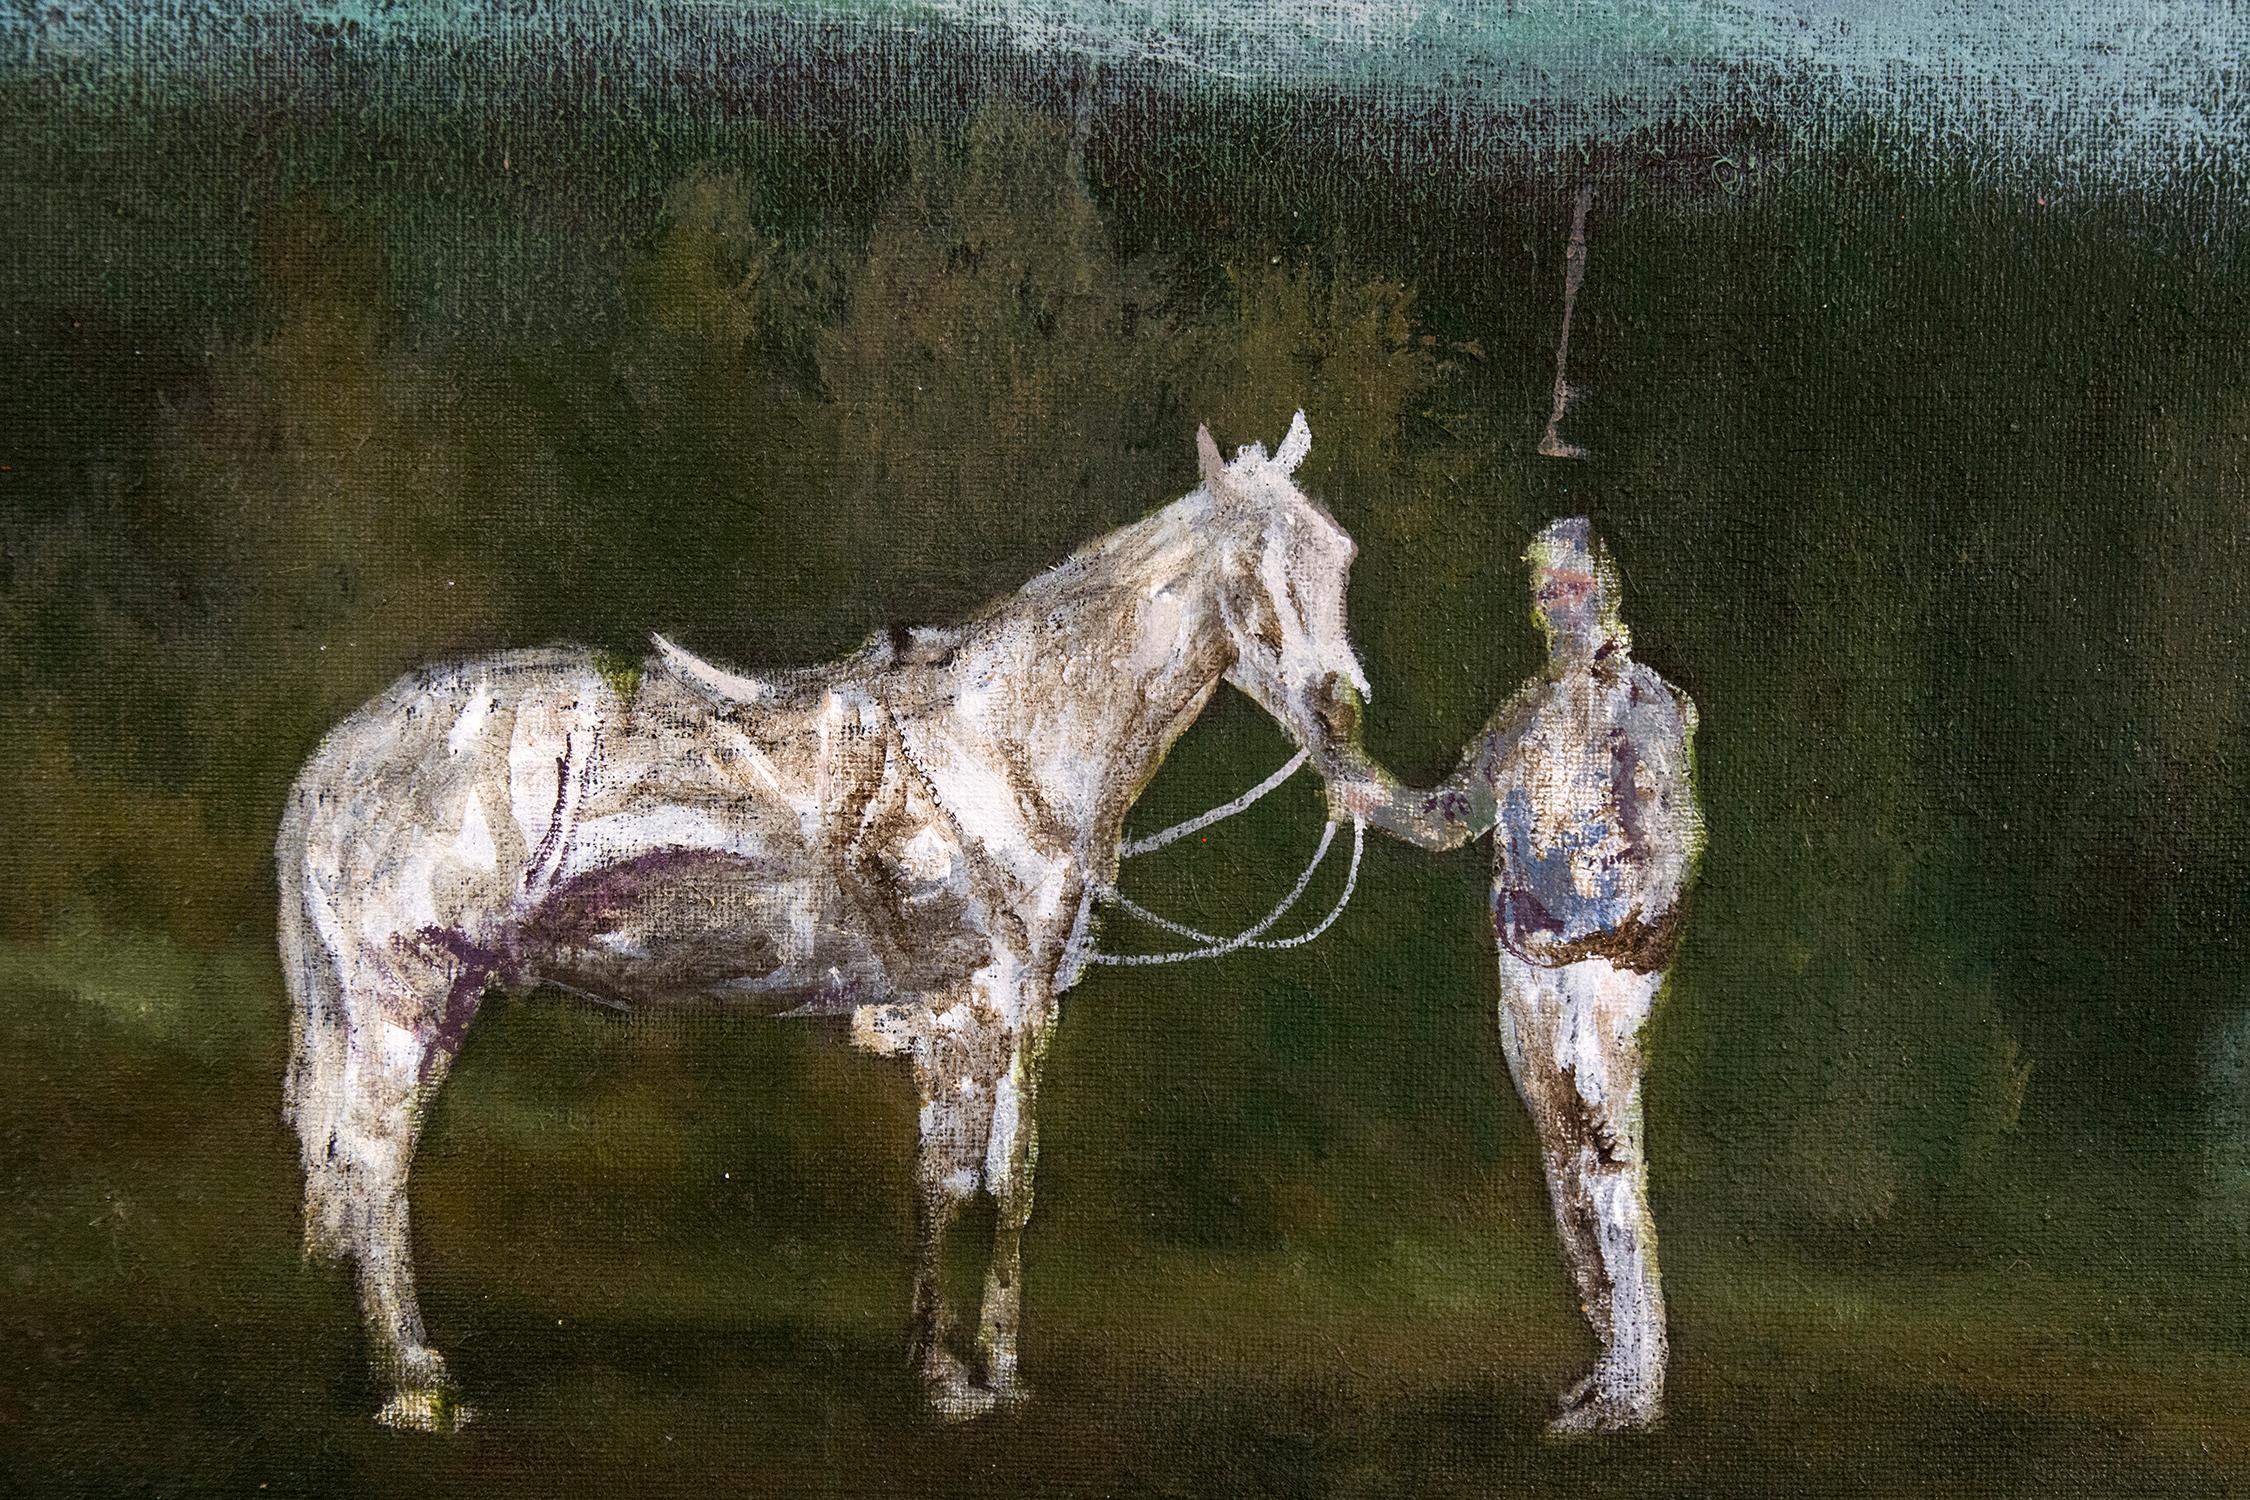 The ghostly figures of a man and horse are set against the epic backdrop of a forested landscape and atmospheric blue sky. Peter Hoffer's paintings evoke nostalgia for classical, romantic forms and periods. Here he seems to look to the sublime in